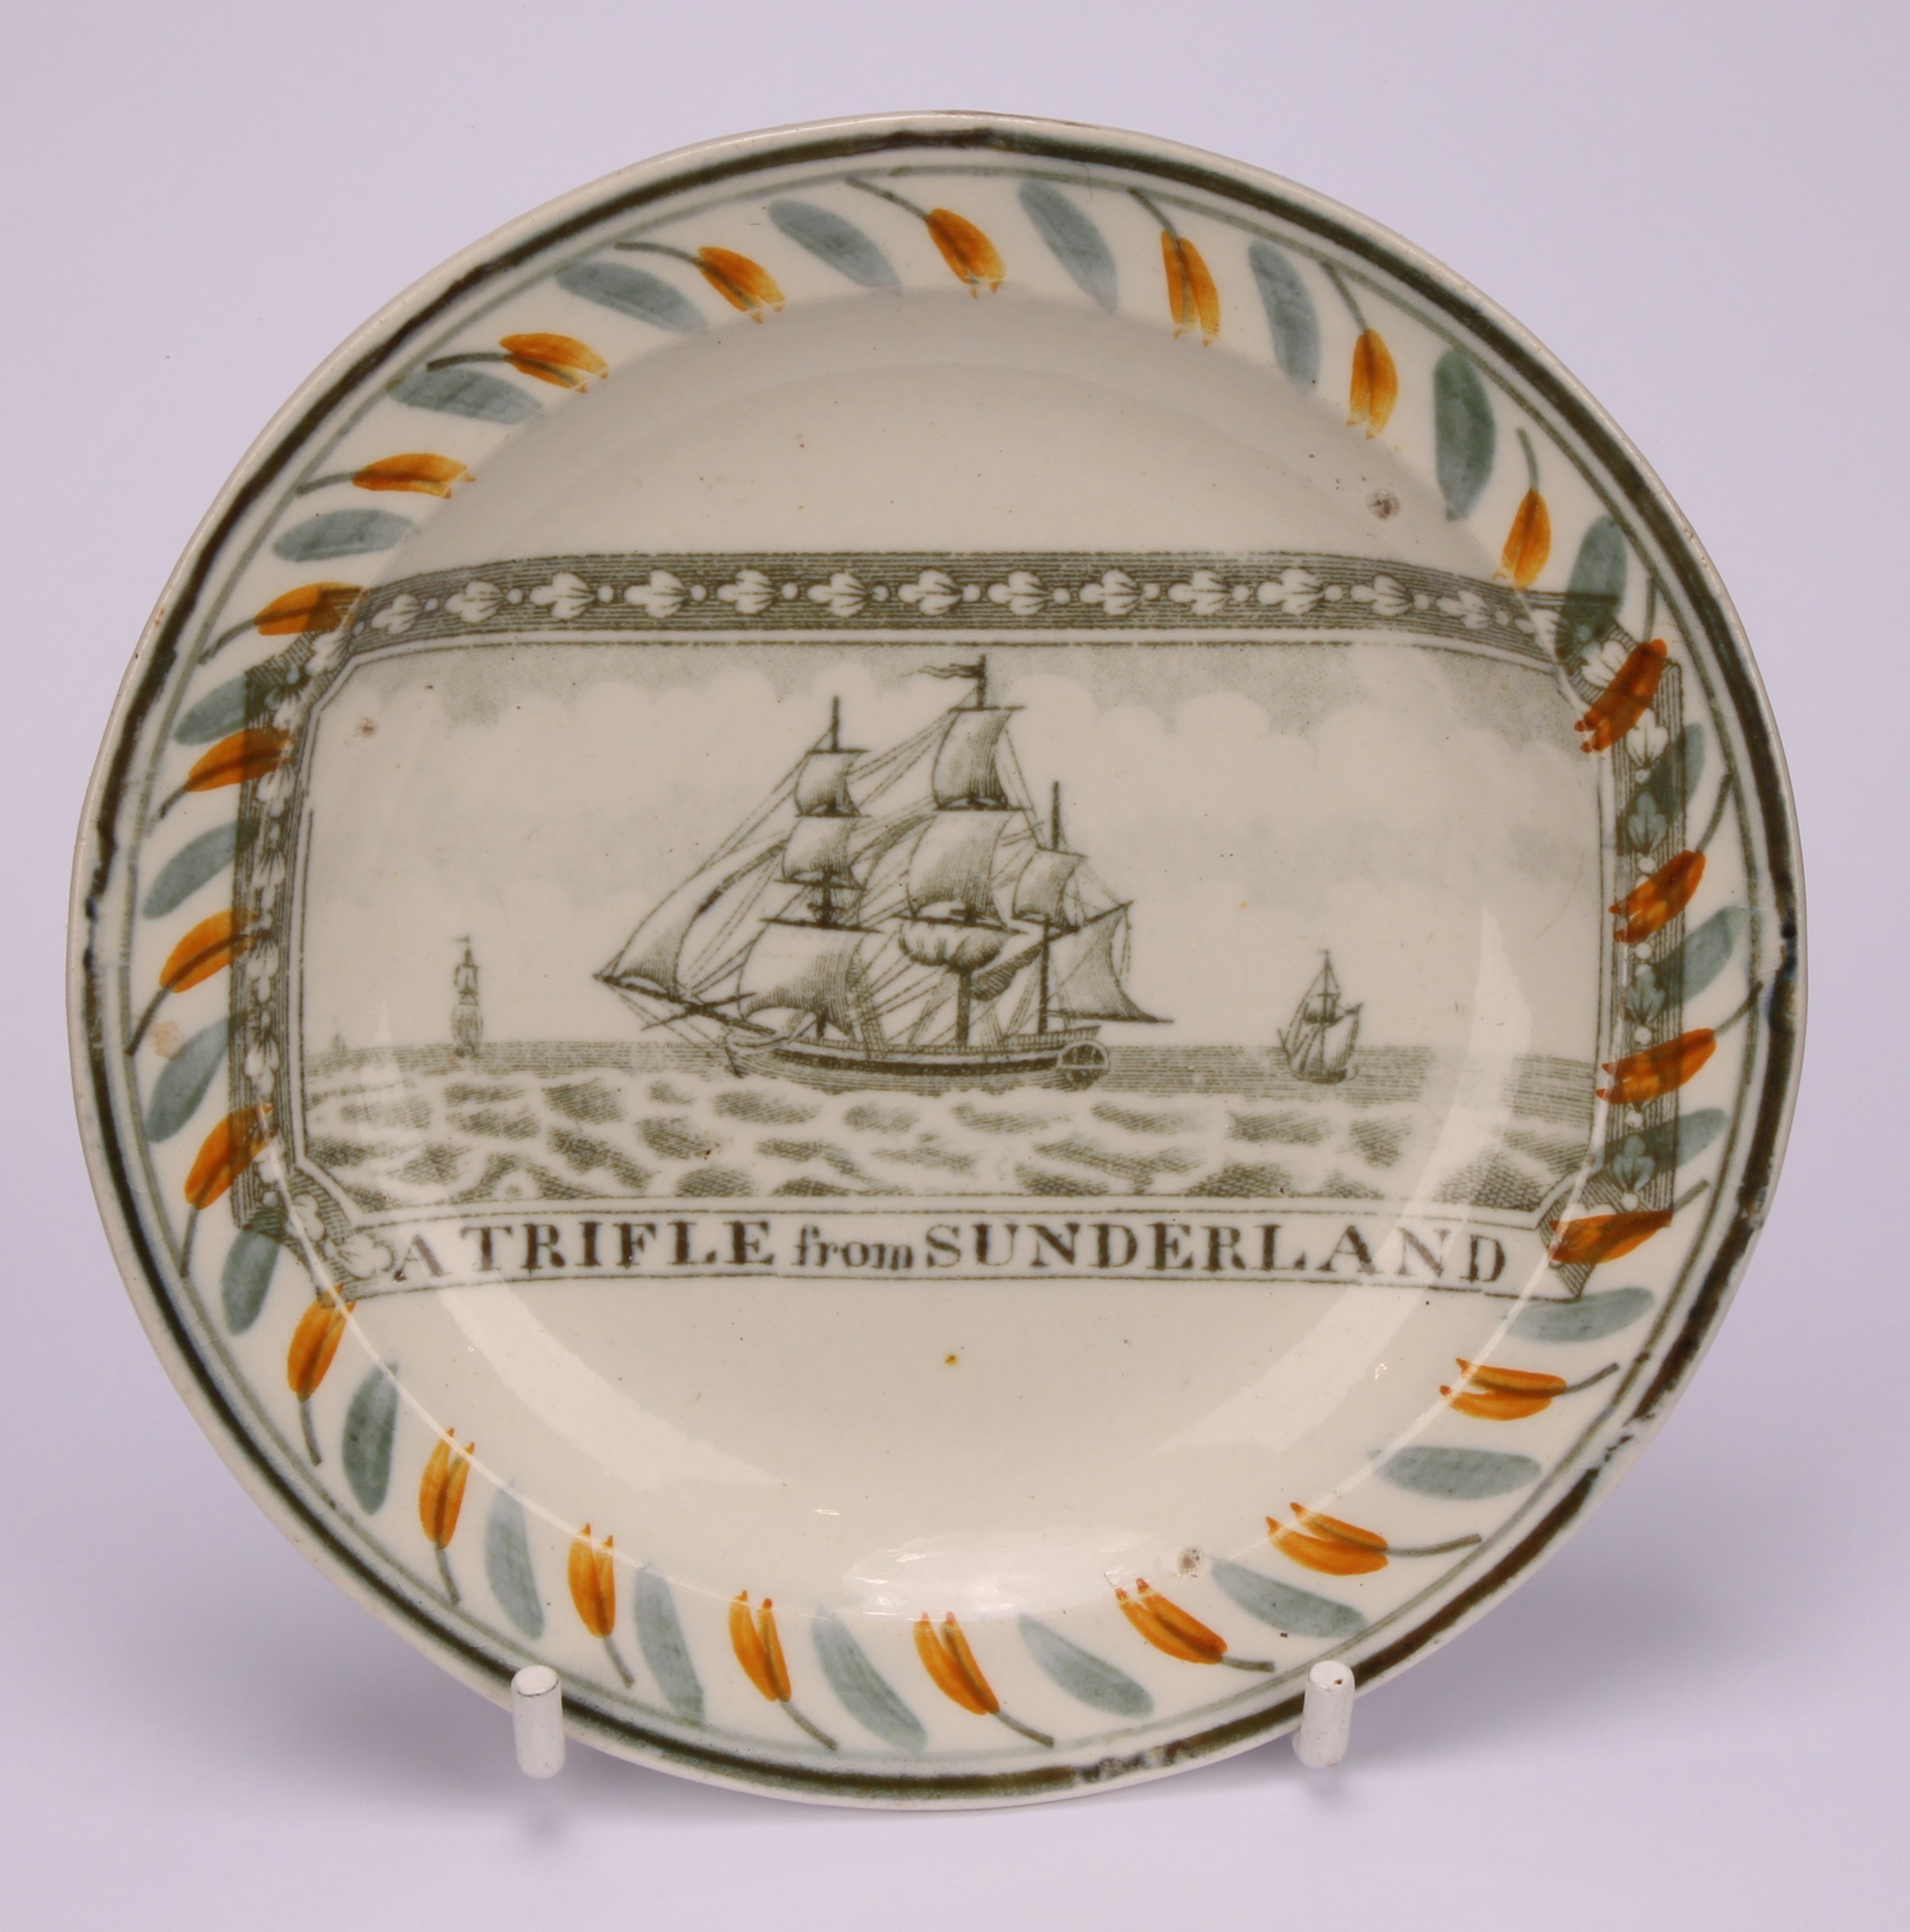 A Dixon, Austin & Co pearlware miniature plate, A Trifle From Sunderland, printed with tall ships, - Image 2 of 3